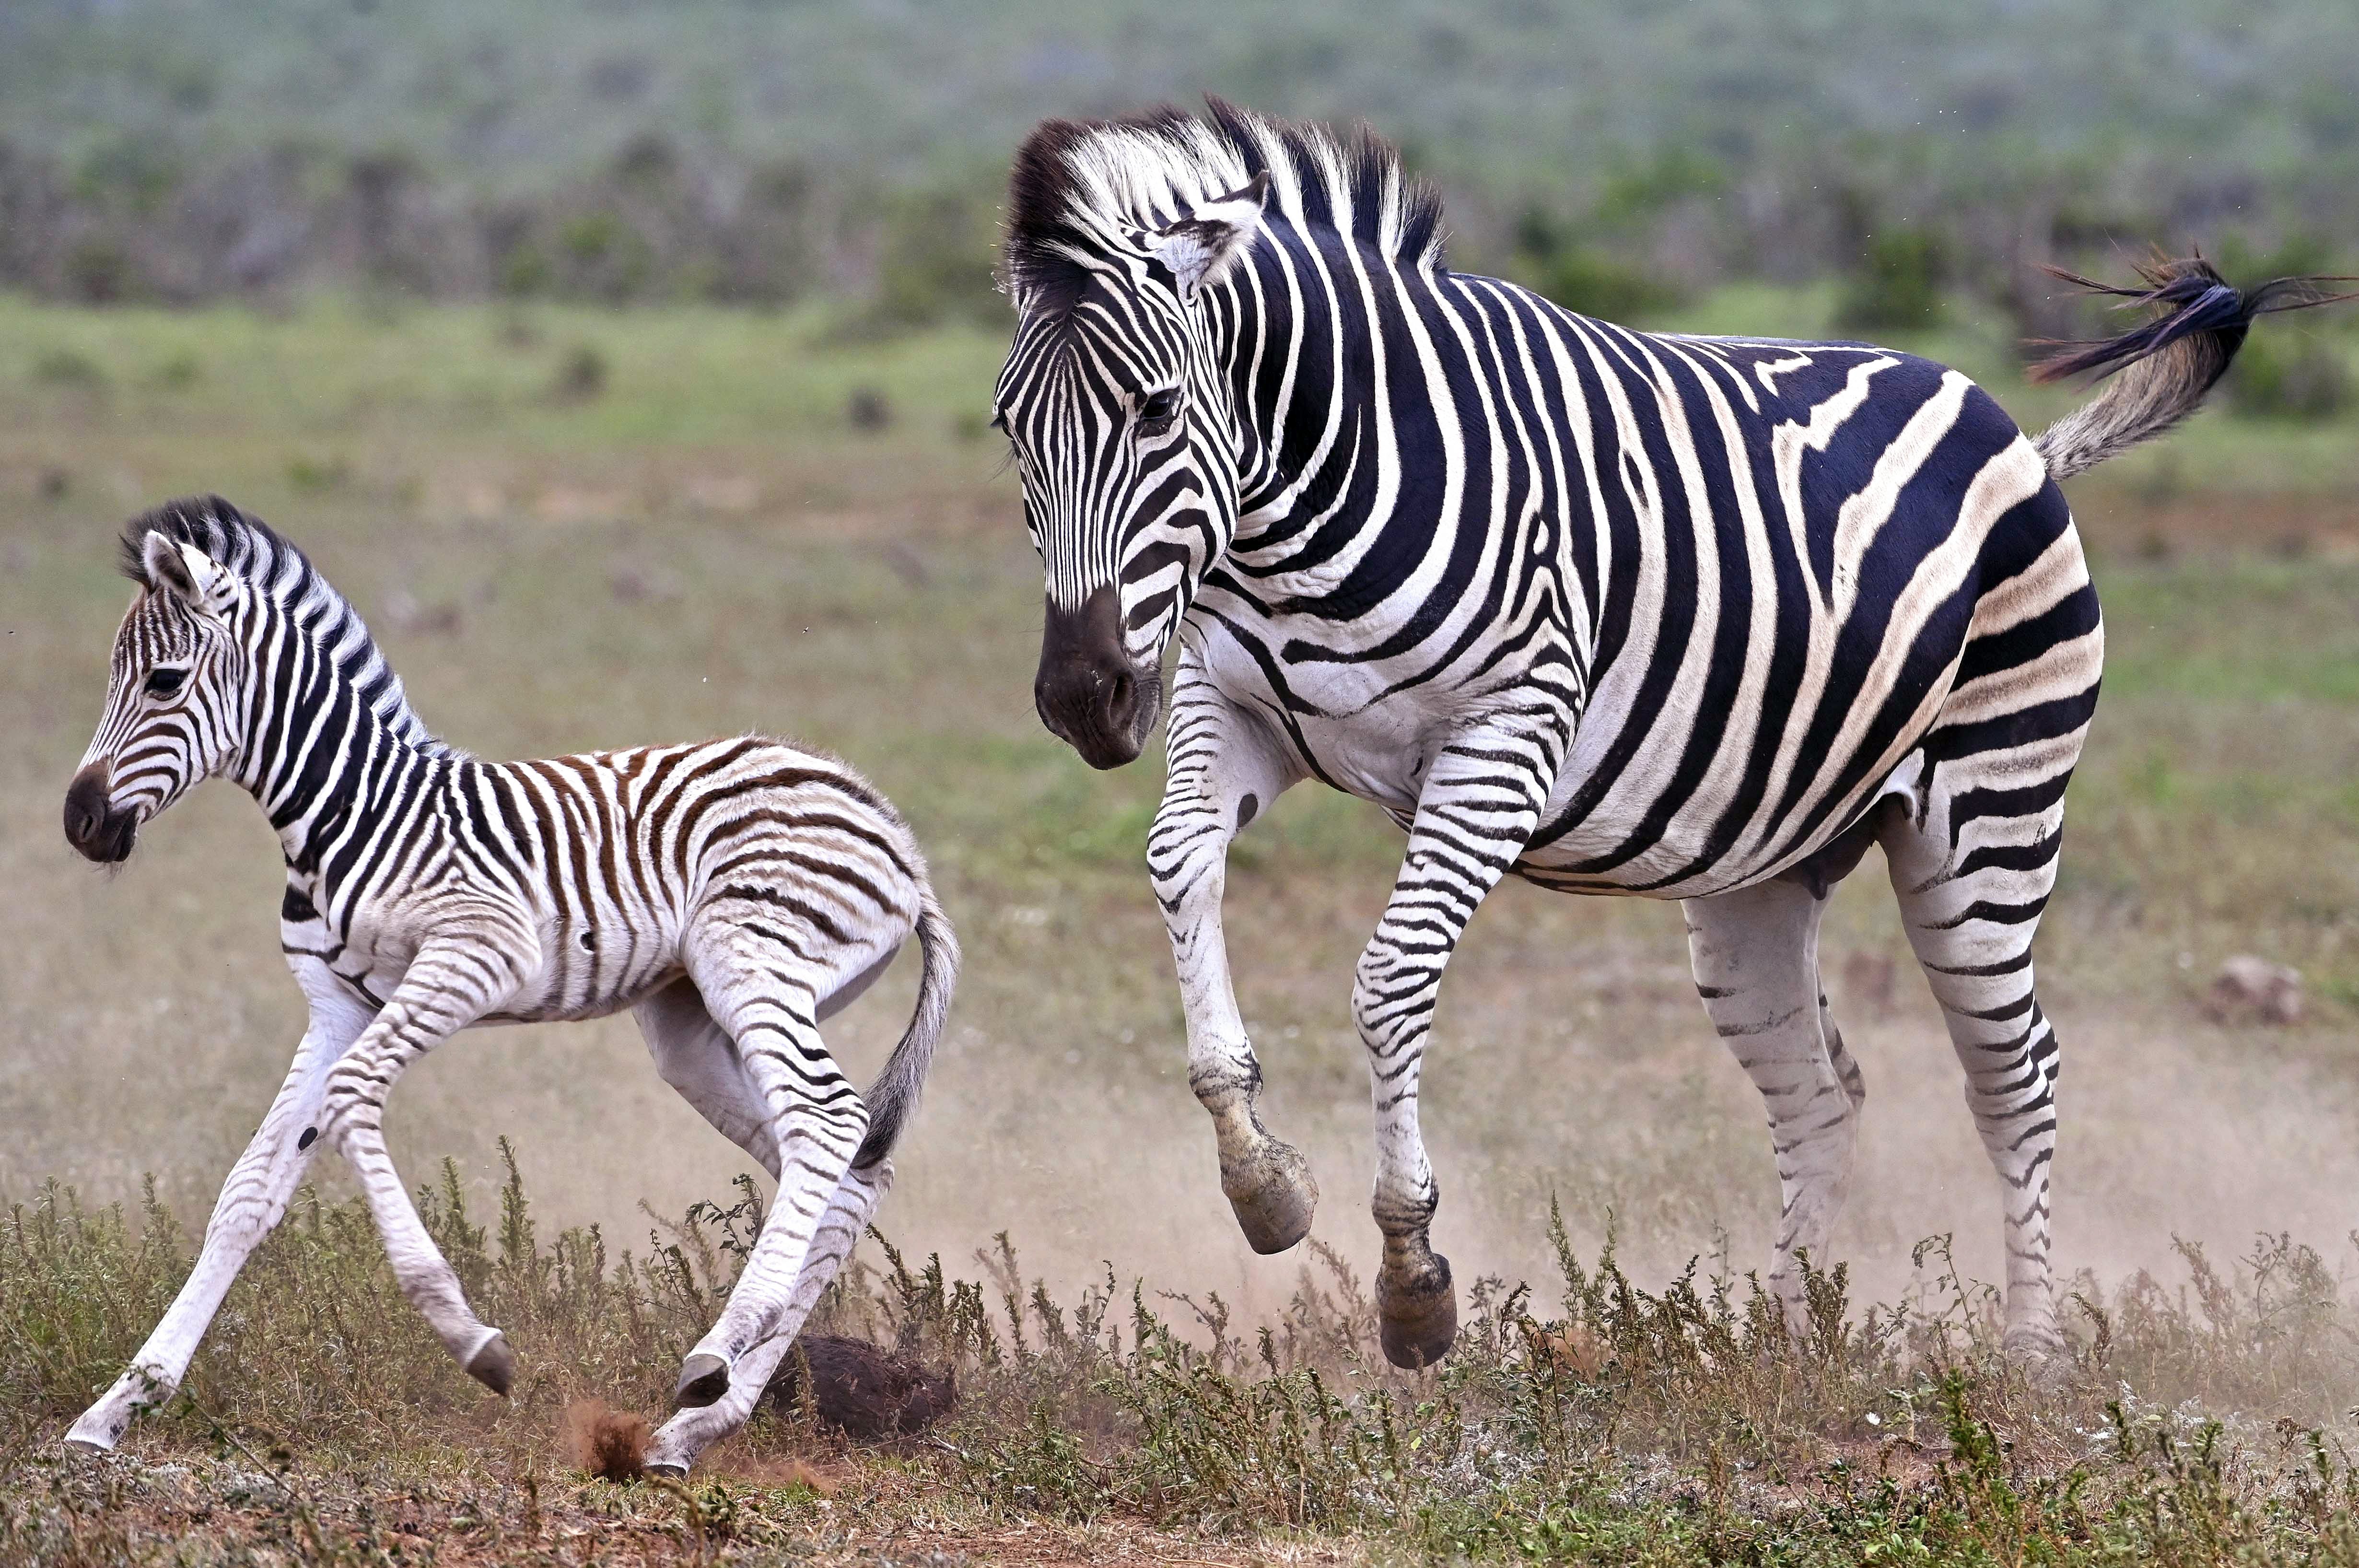 A baby zebra and mother running together at Addo Elephant National Park